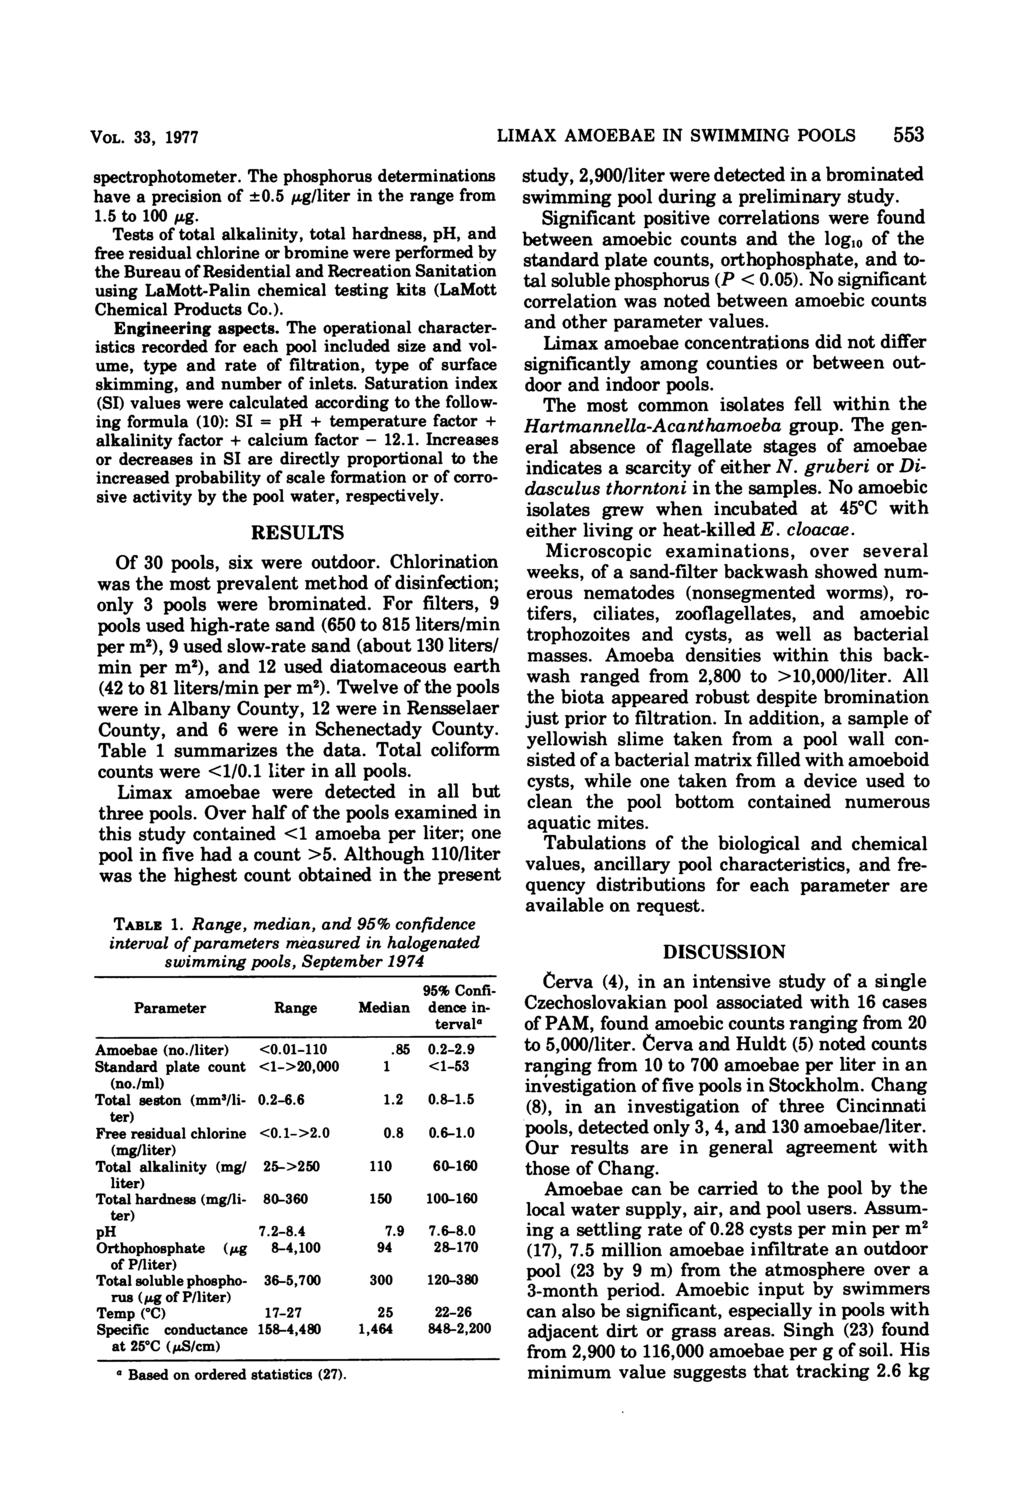 VOL. 33, 1977 spectrophotometer. The phosphorus determinations have a precision of +0.5 ug/liter in the range from 1.5 to 100 ug.